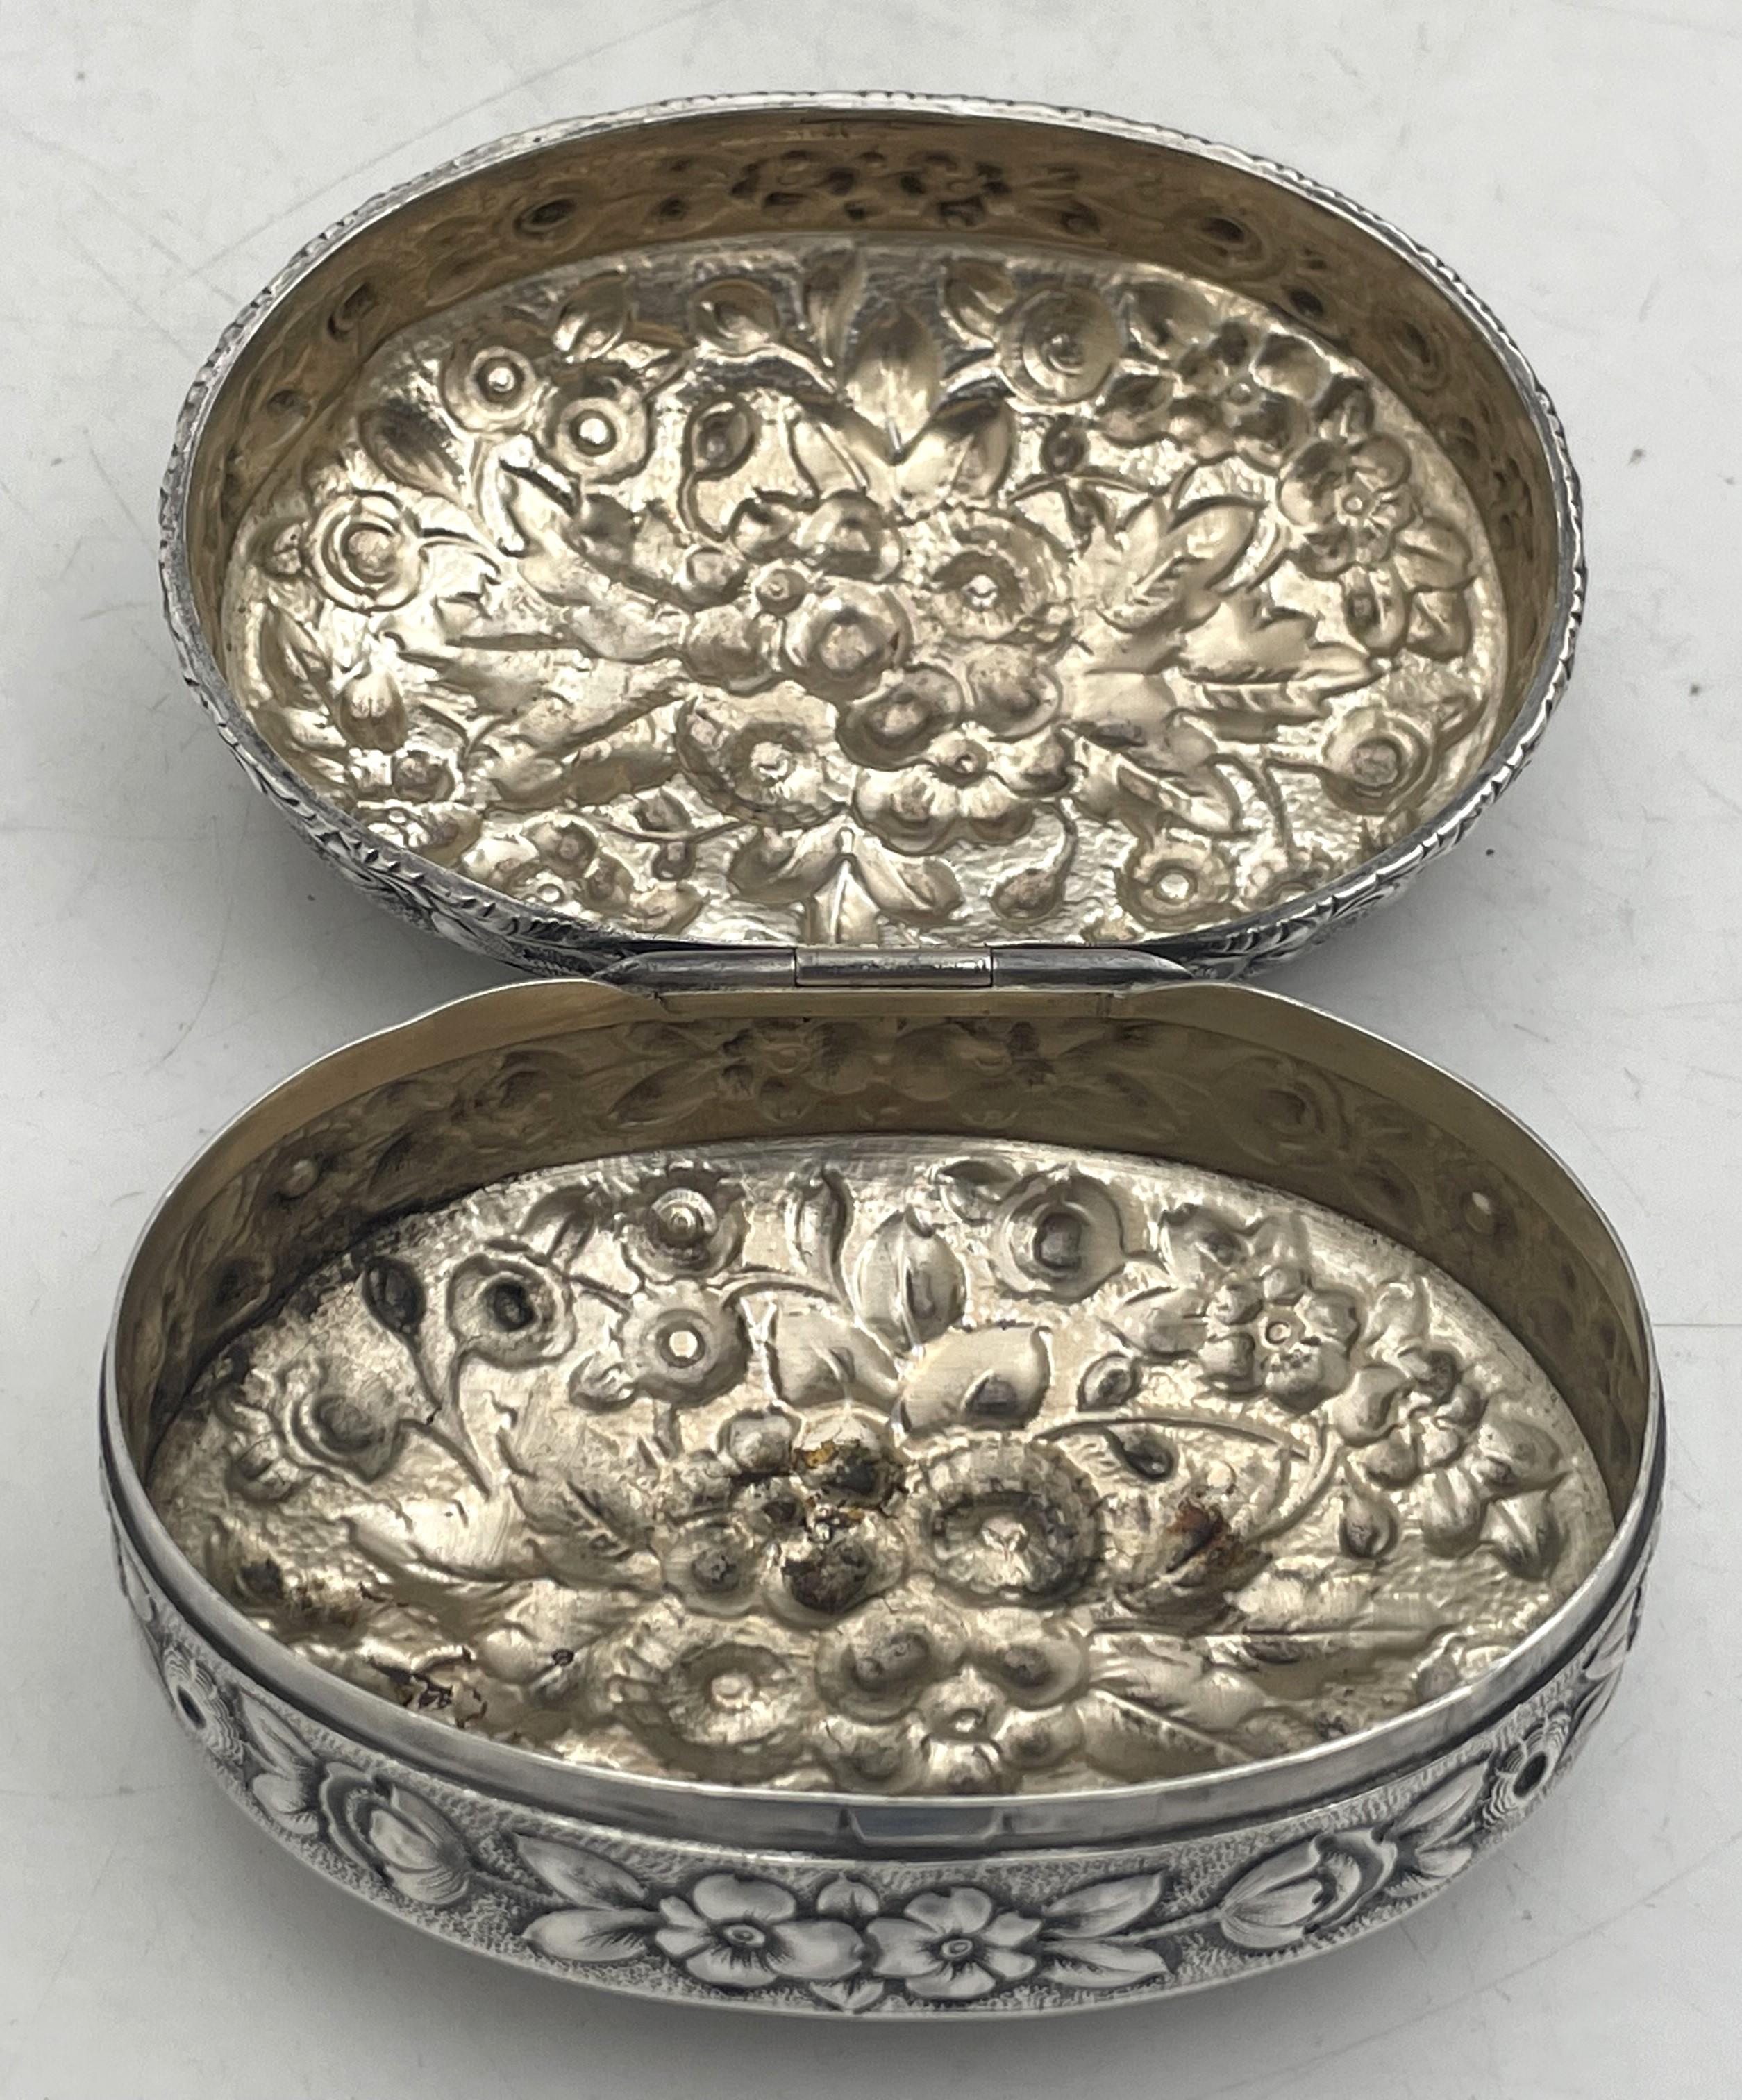 Dominick & Haff / Bailey, Banks & Biddle Sterling Silver Oval Repousse Snuff Box In Good Condition For Sale In New York, NY